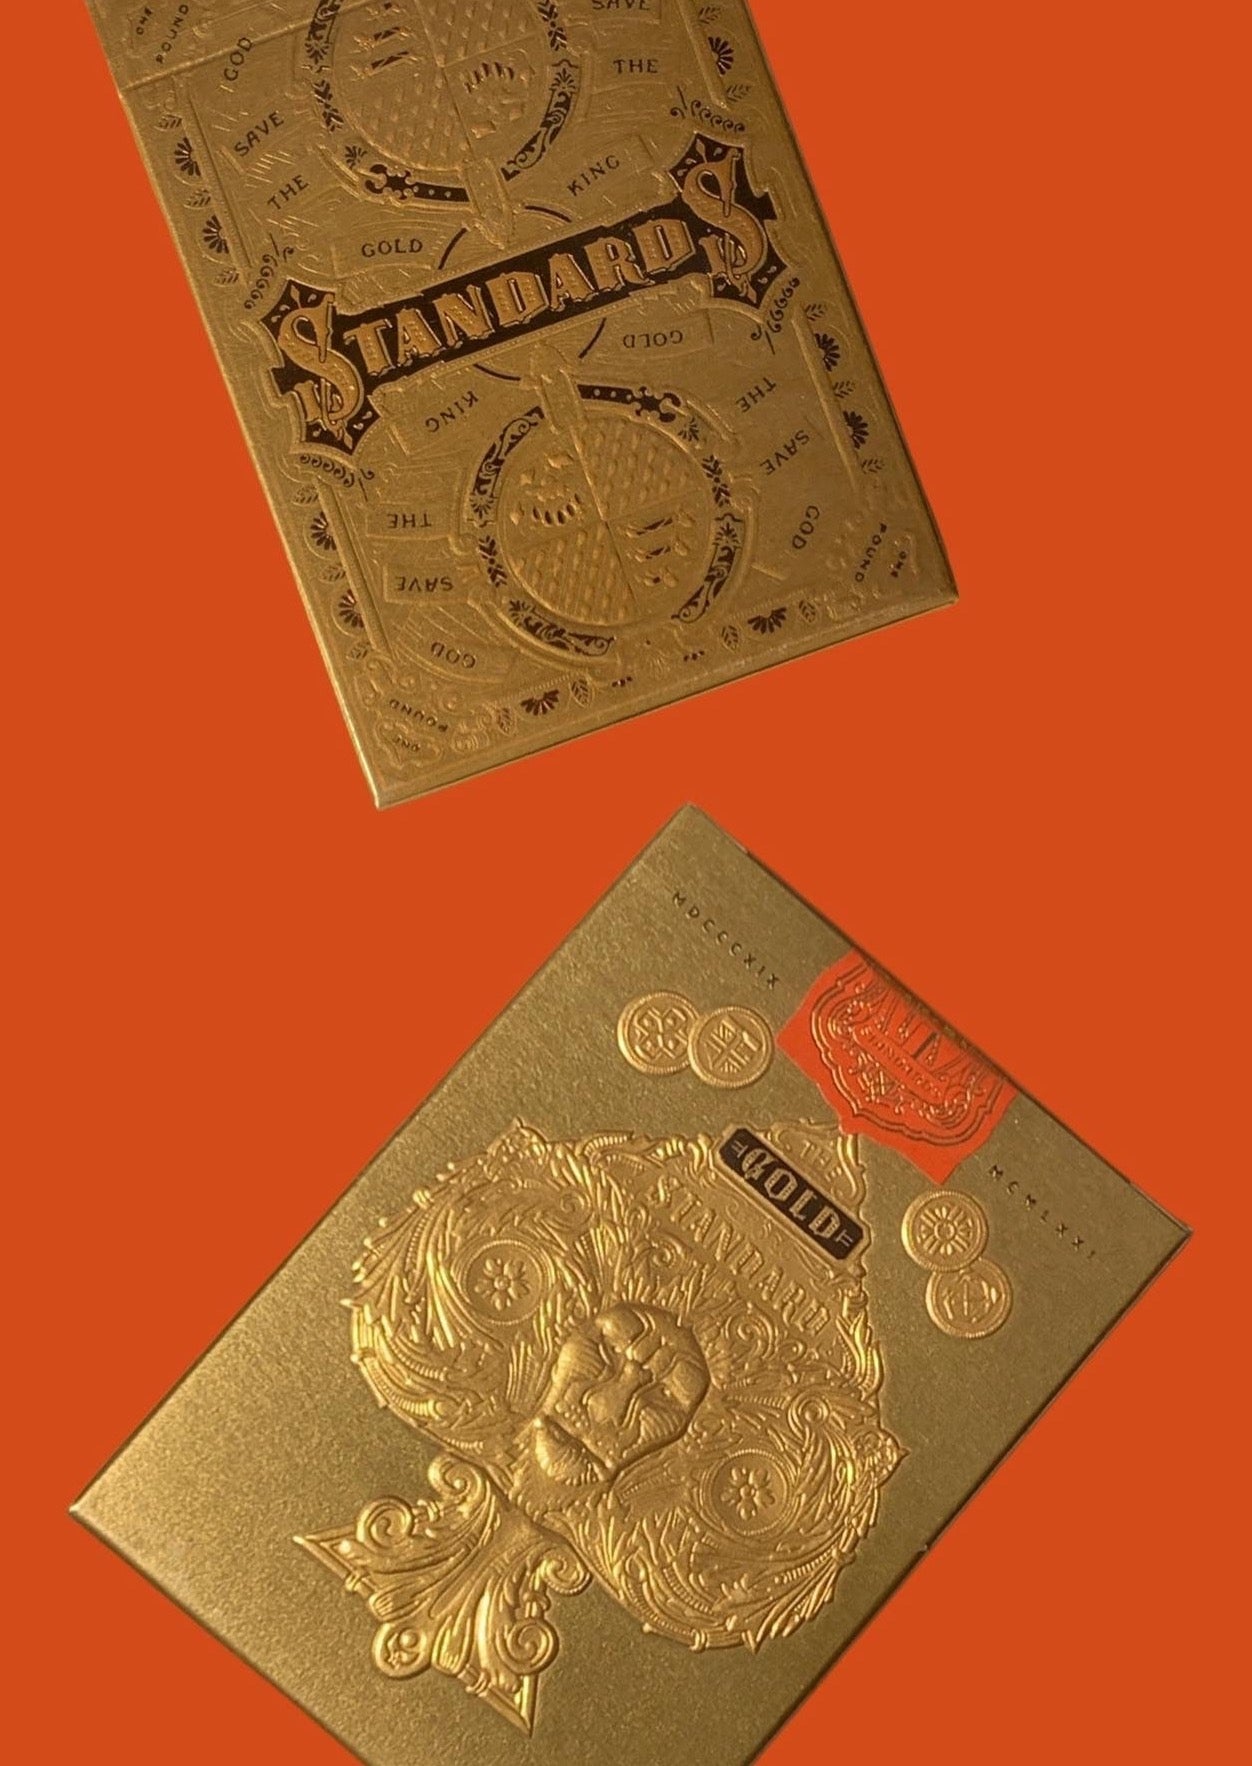 GOLD STANDARDS PLAYING CARDS